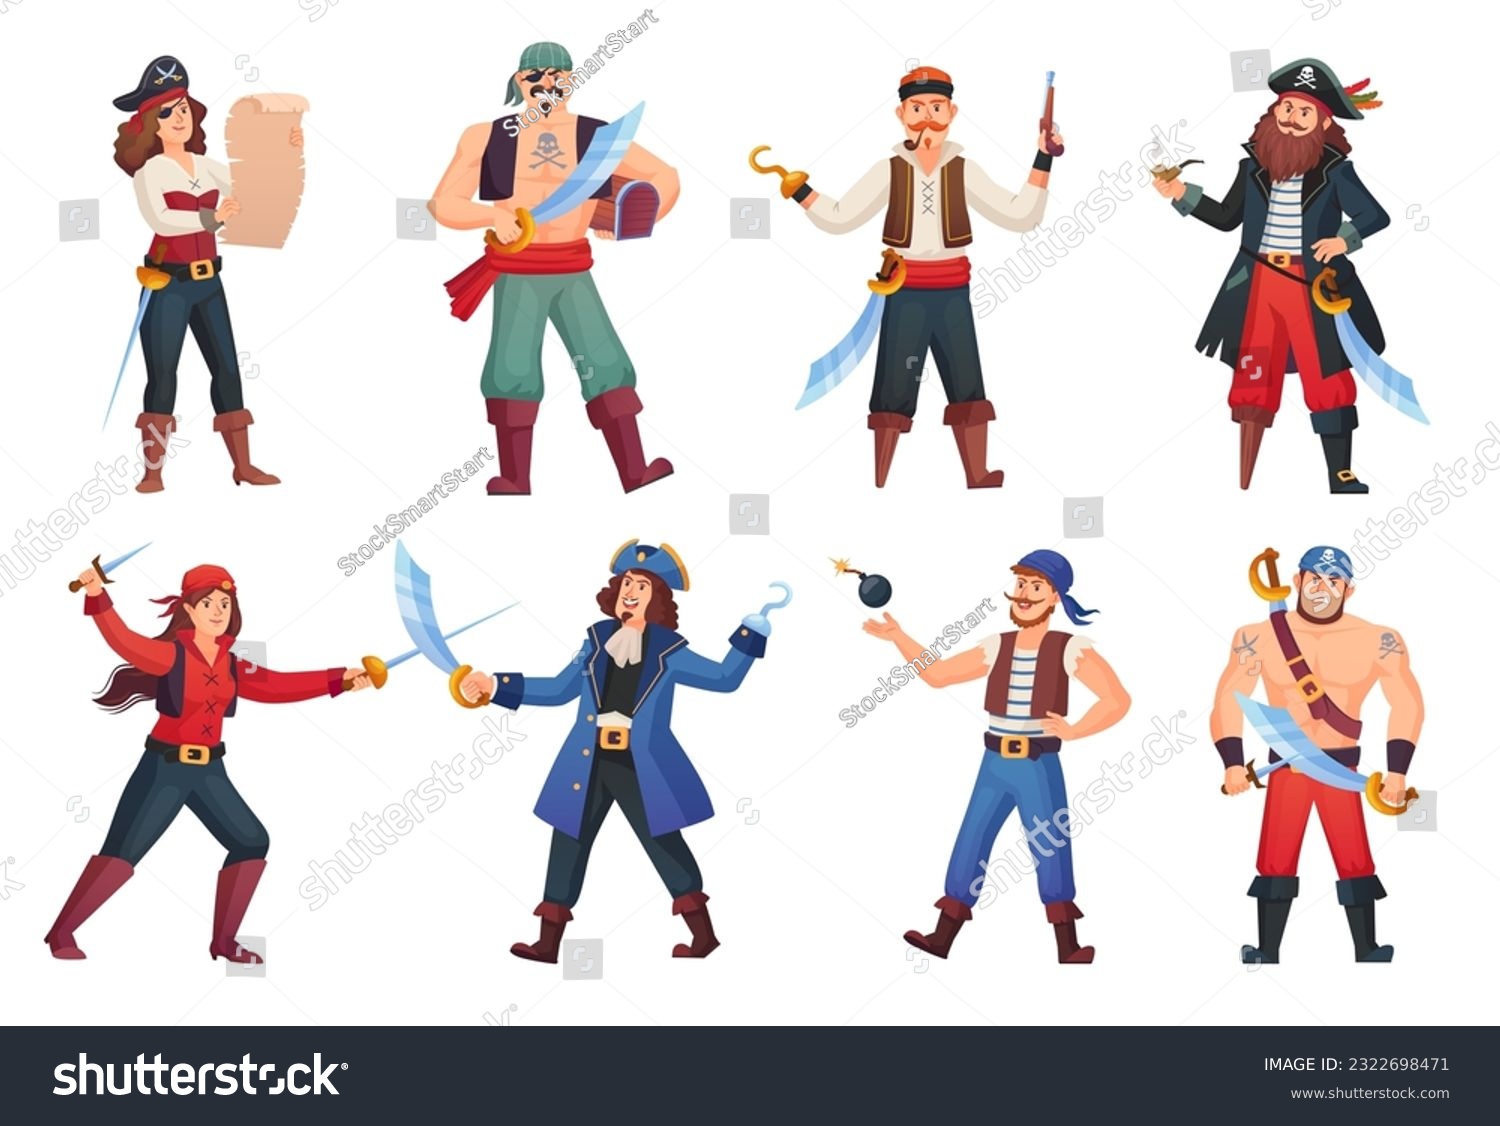 SVG of Corsairs characters. Cartoon pirates character, people in pirate costume corsair captain with hook hand sea rover happy sailors or buccaneer man pirat vector illustration of pirate corsair character svg